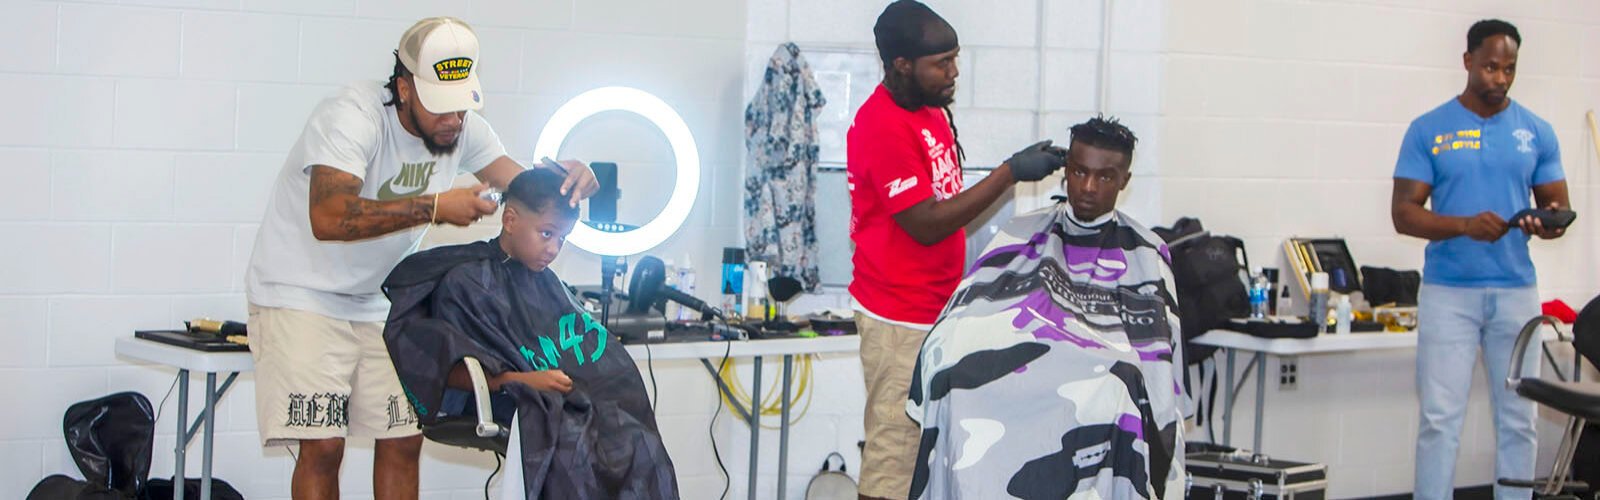 Hair stylists and barbers donated their services for hundreds of children and teens in a pop-up salon at the Bullard Family Foundation's 6th Annual Back to School Bash, organized by WWE superstar Titus O'Neil/Thaddeus Bullard at Raymond James Stadium